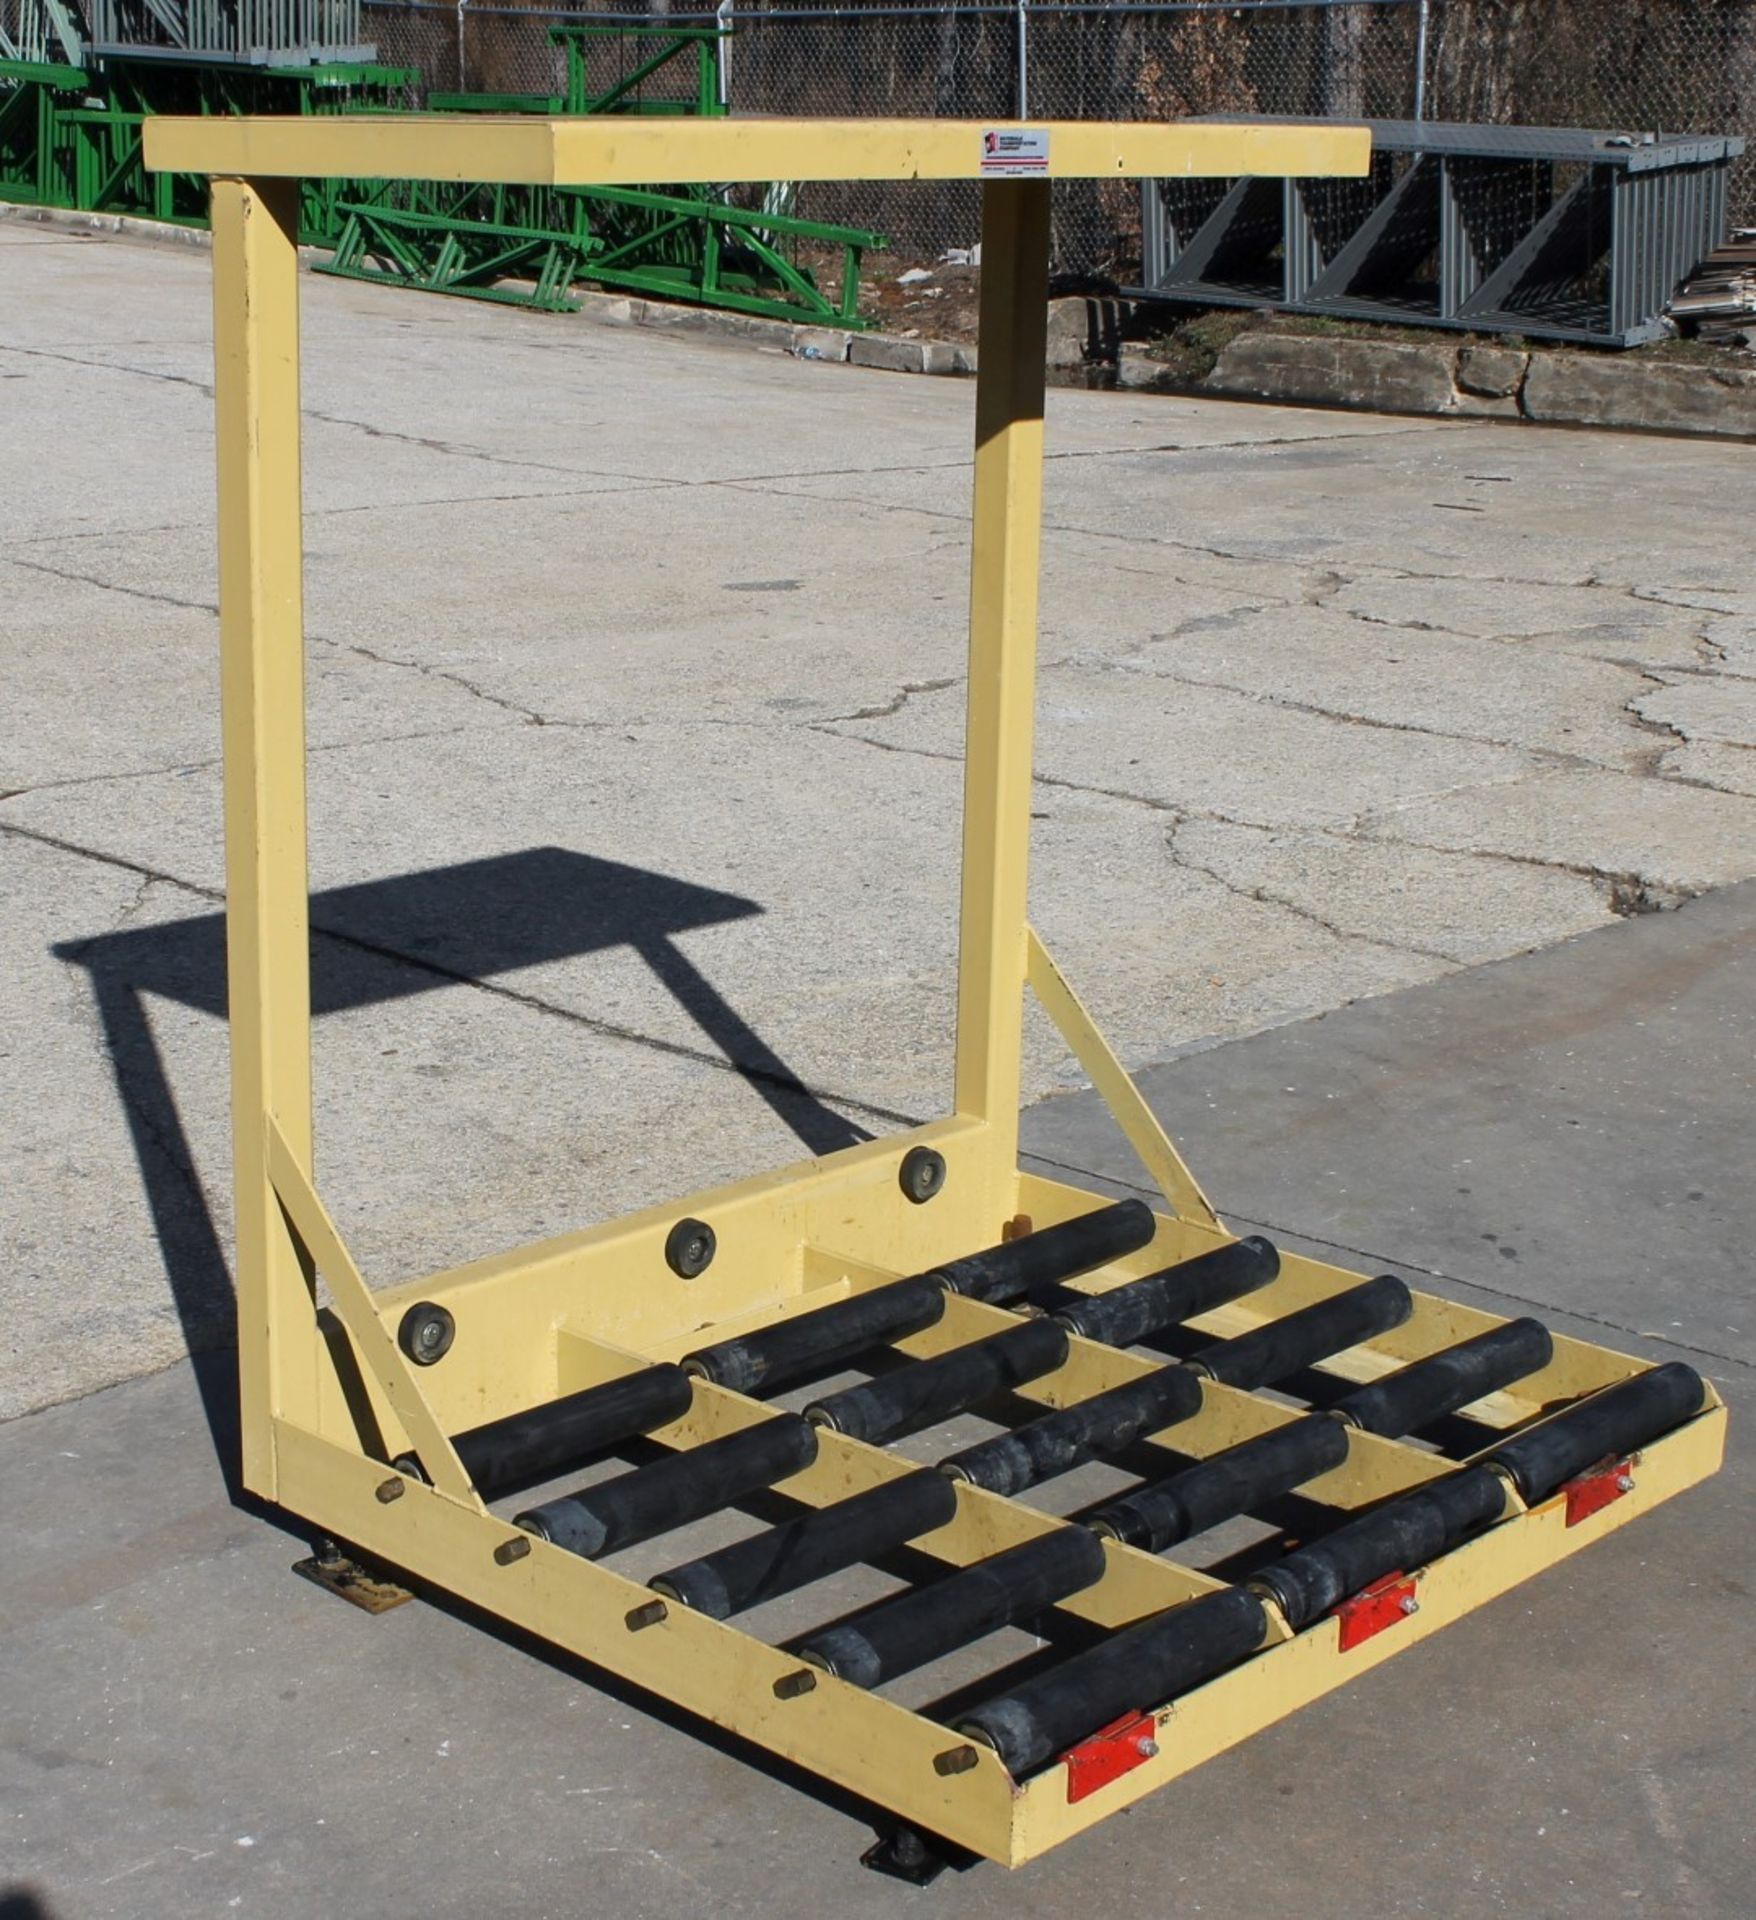 BATTERY CHARGING STATION,  SPACE FOR 3 BATTERIES, 15"W X 39"D ROLLER LENGTH, TOP PLATFORM SIZE: 24"L - Image 2 of 3